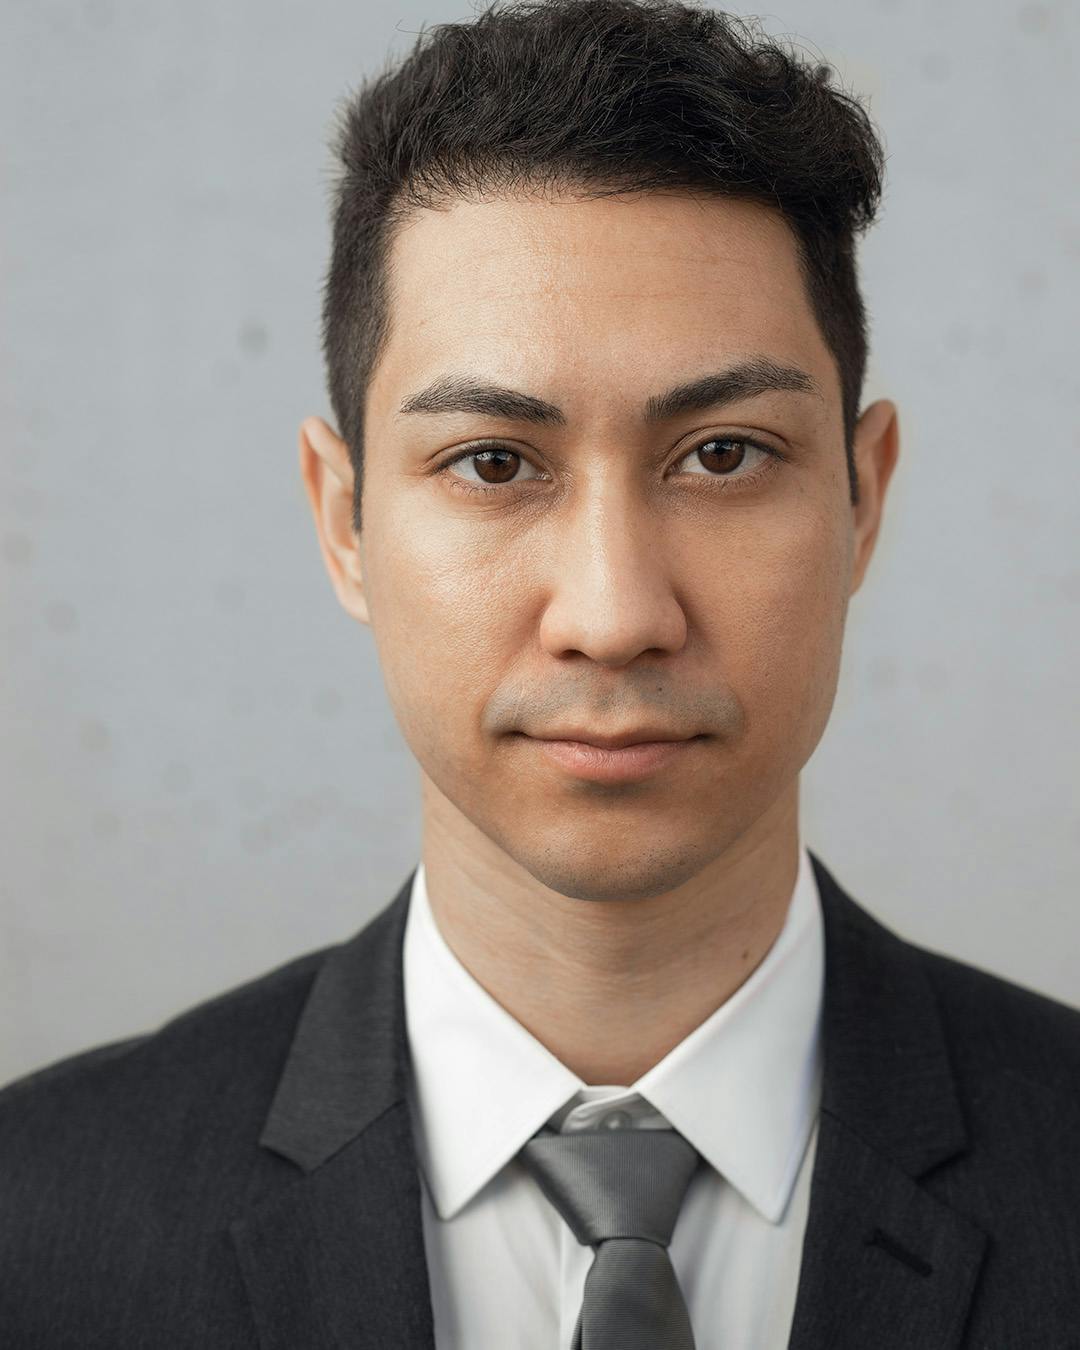 Man wearing suit in a no noise photo.